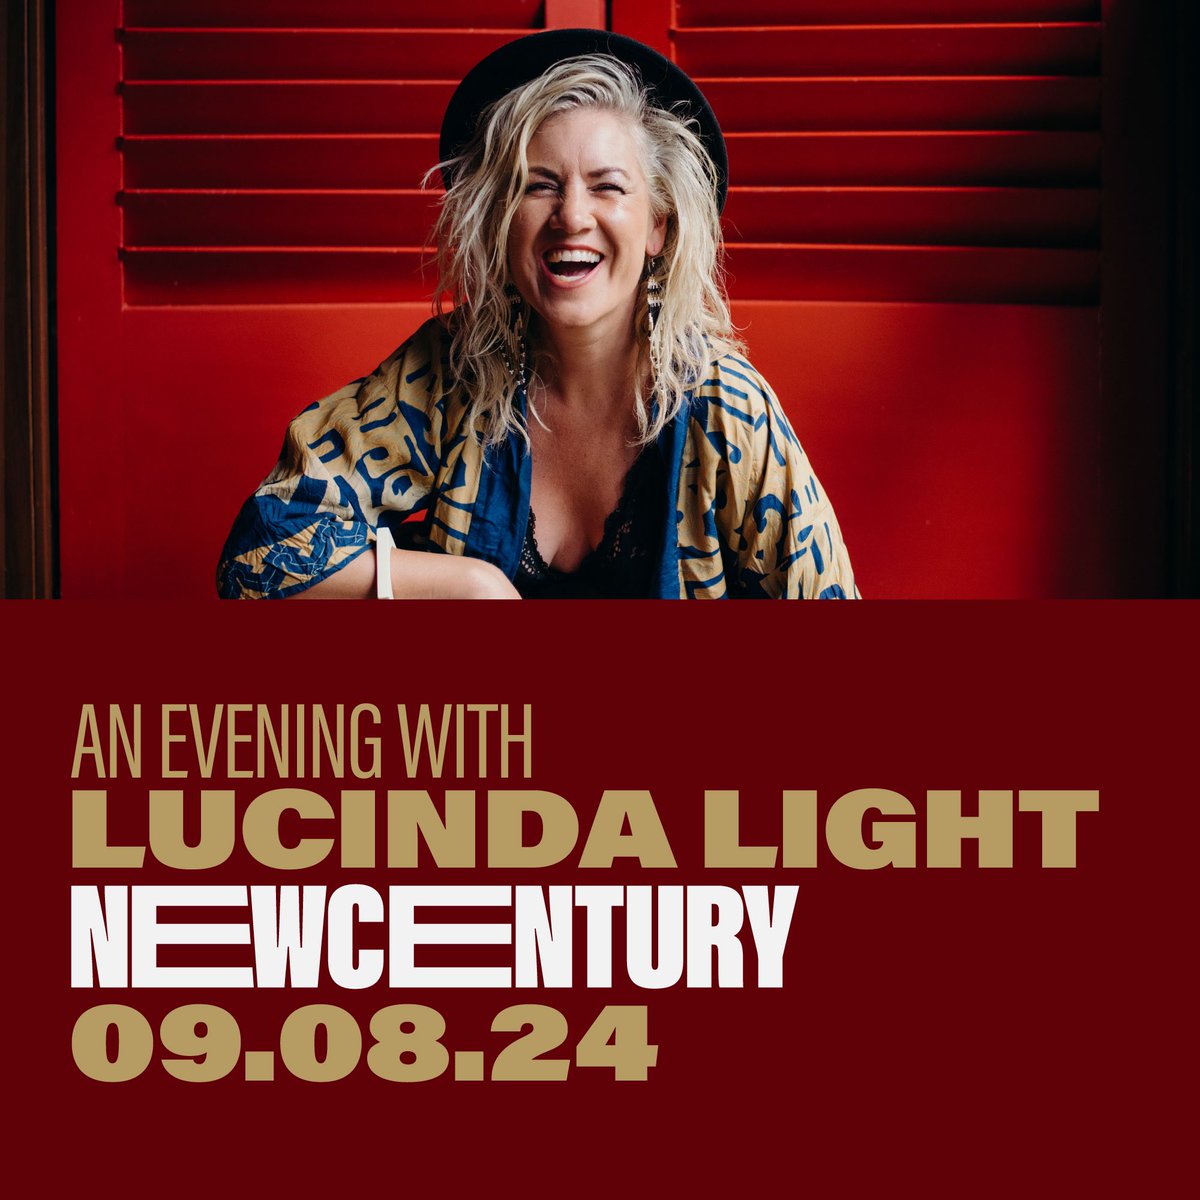 Married at First Sight Australia’s star Lucinda Light will share her infectious zest for life at a special ‘evening with’ event at New Century on 9th August Tickets on sale tomorrow: l link.dice.fm/n626553936ca